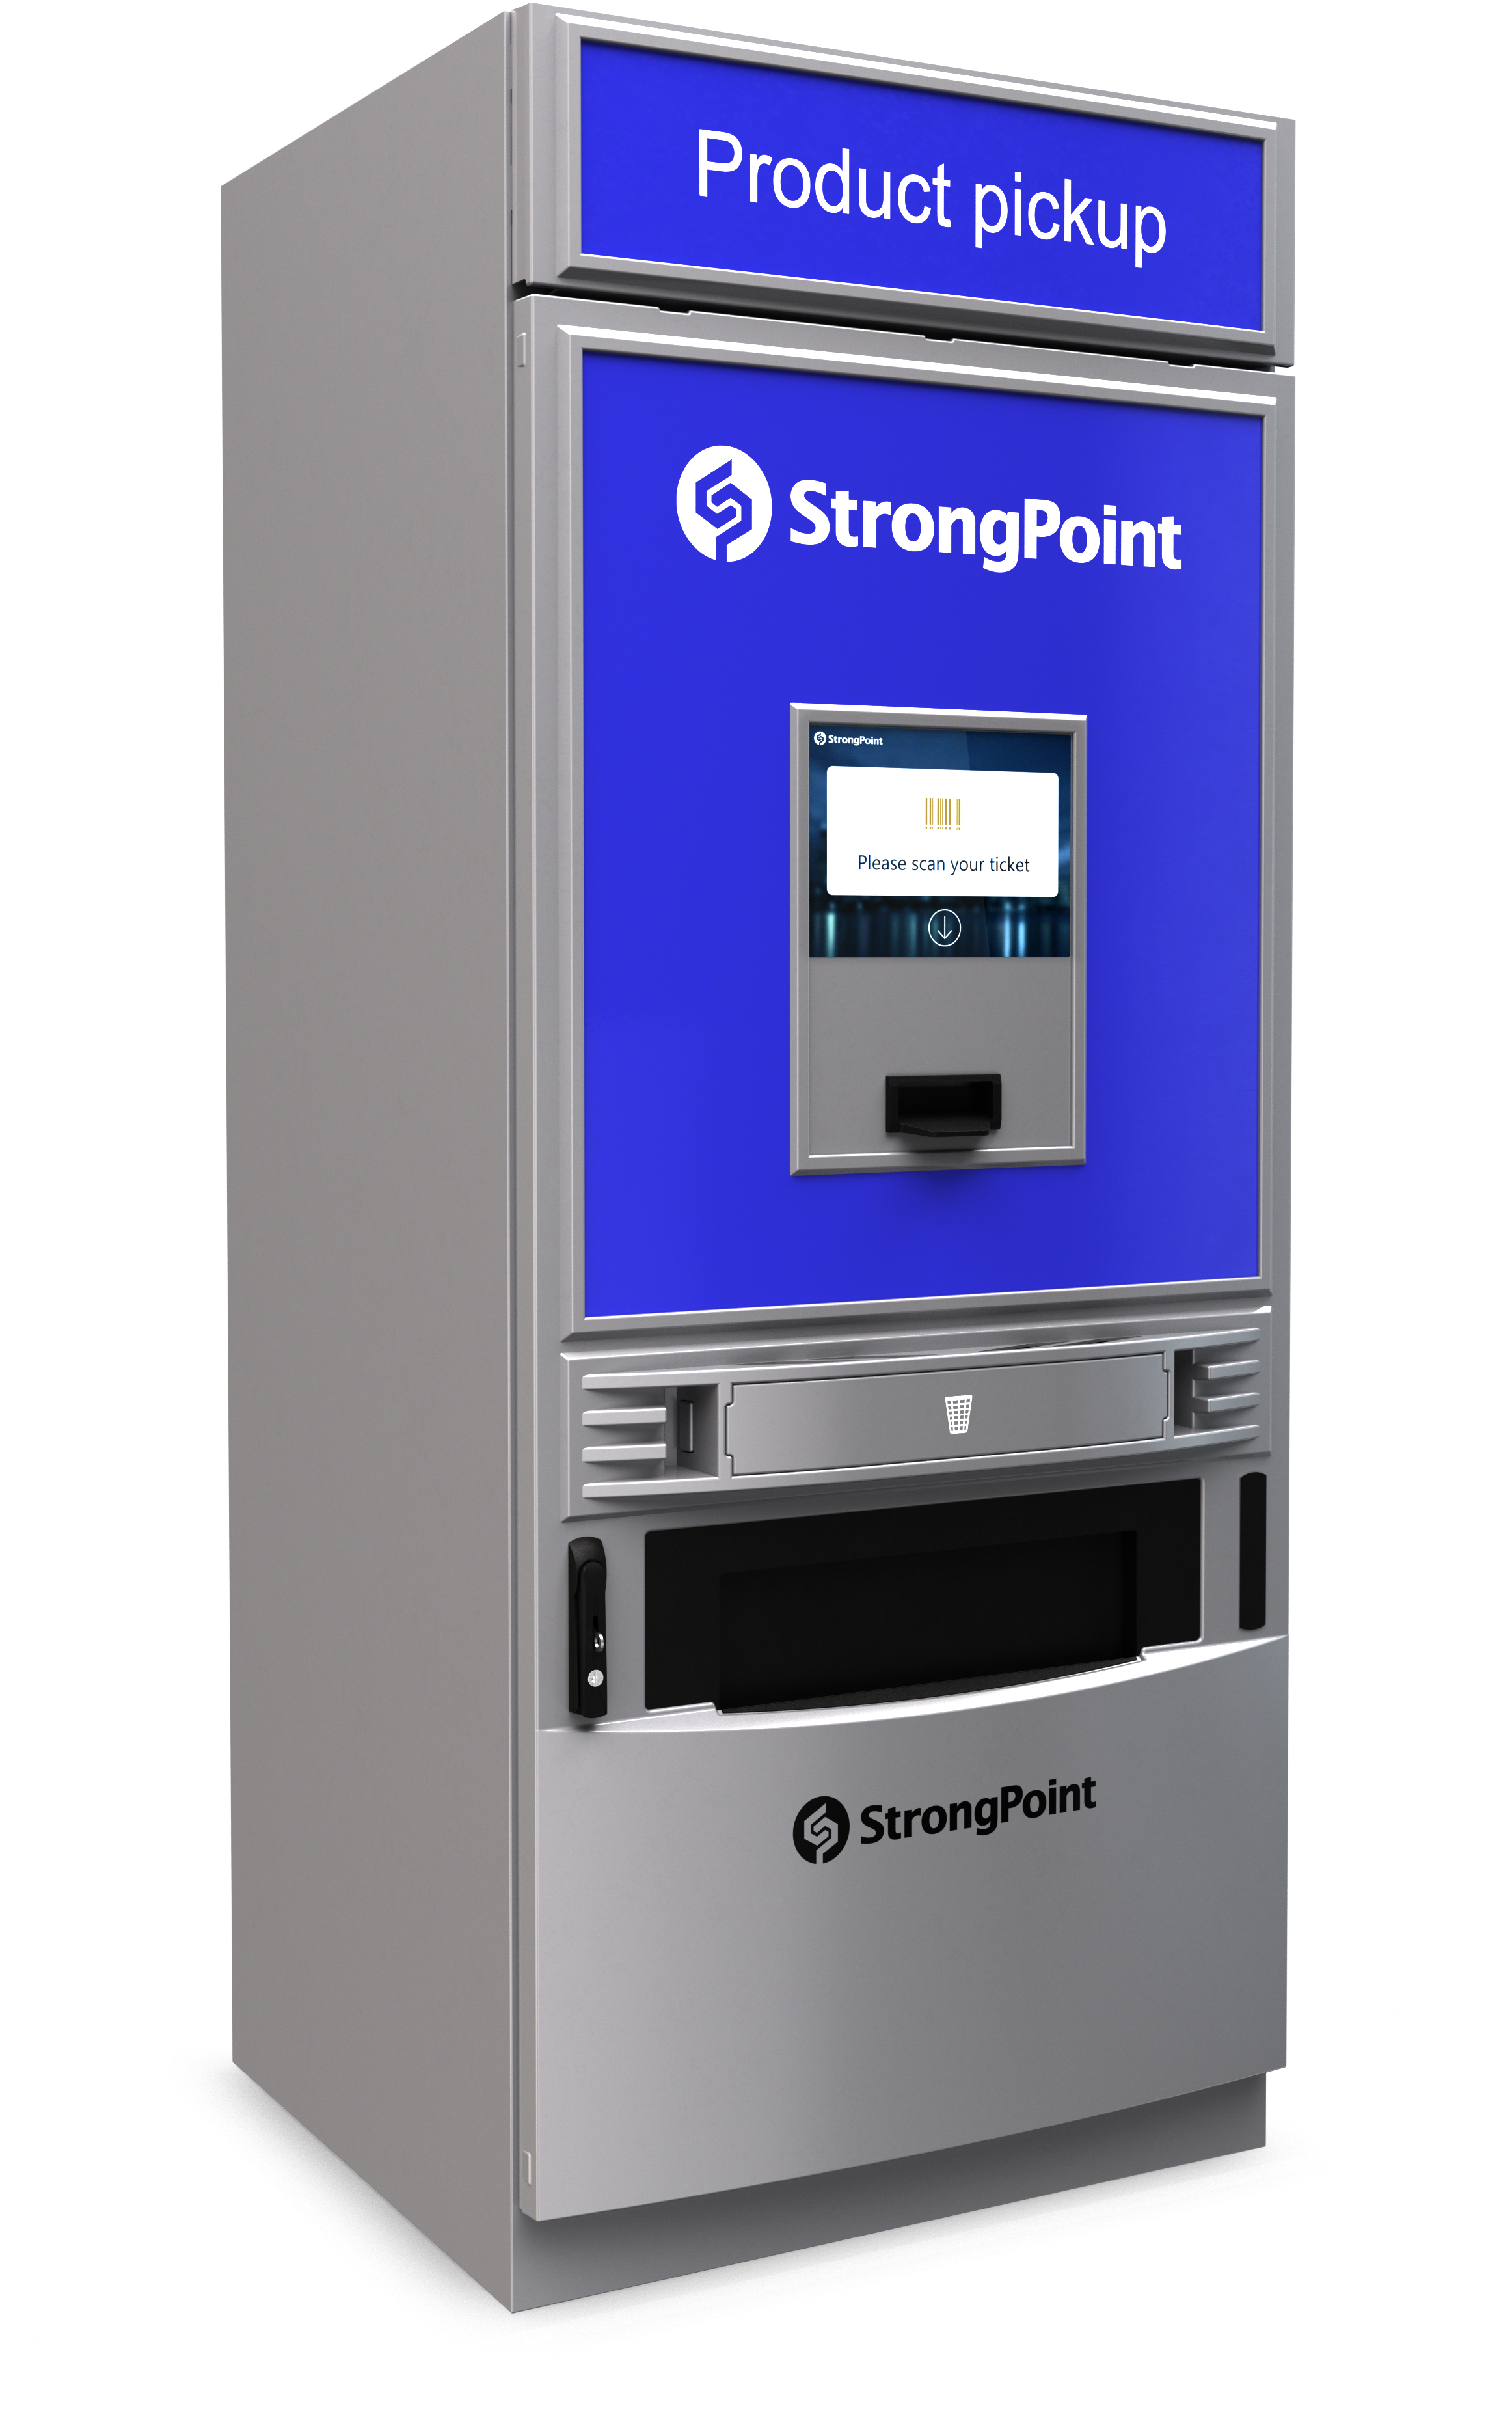 Vensafe dispencer by StrongPoint offers secure selling of age-restricted and high-theft products